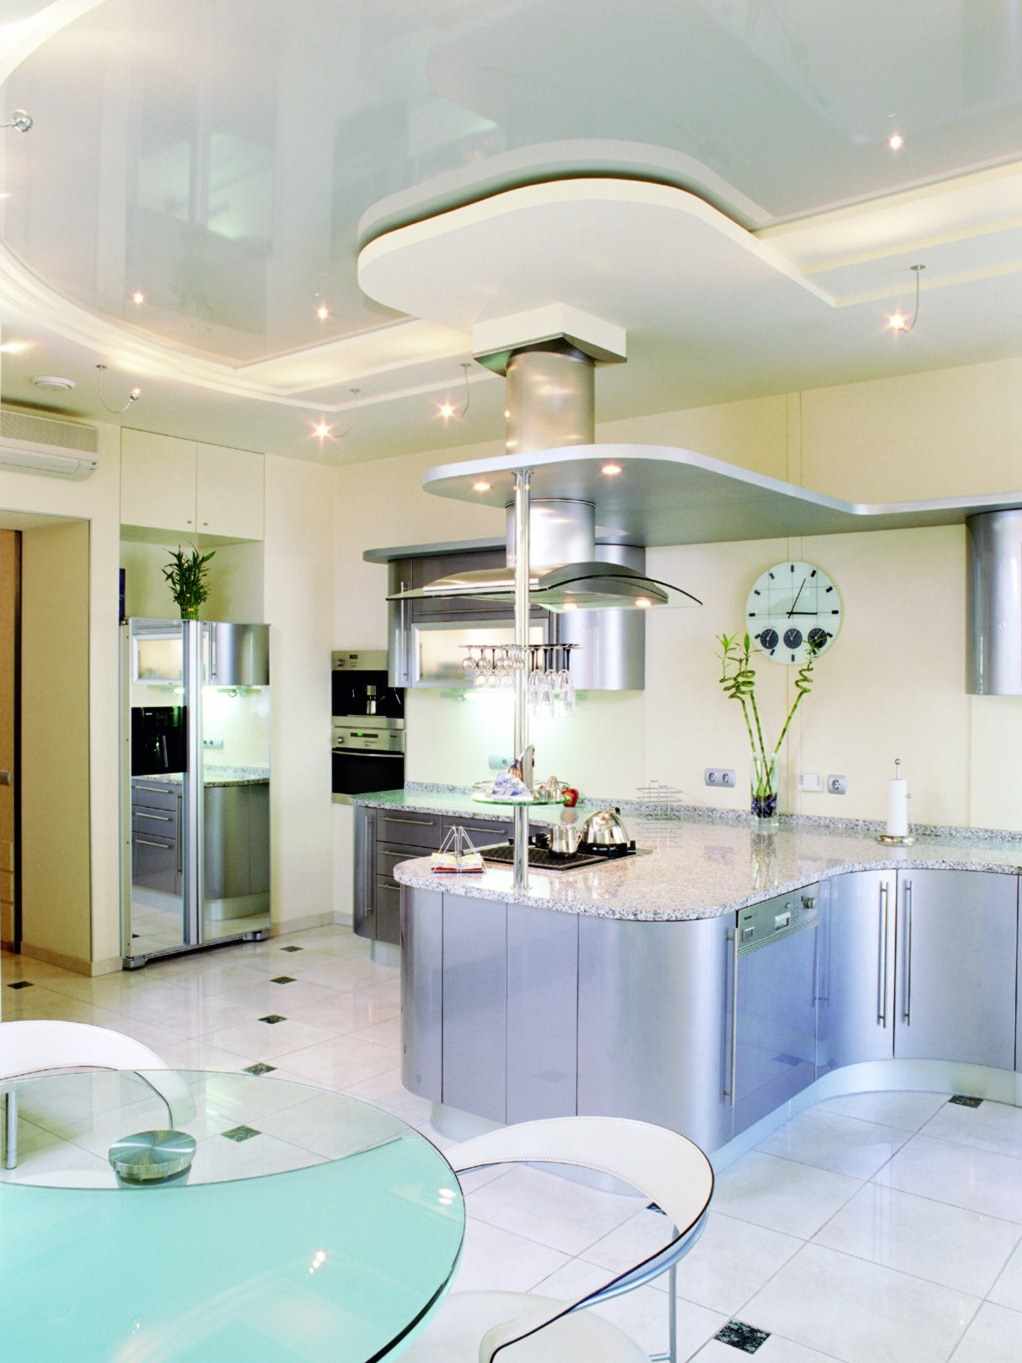 an example of a bright interior ceiling in the kitchen